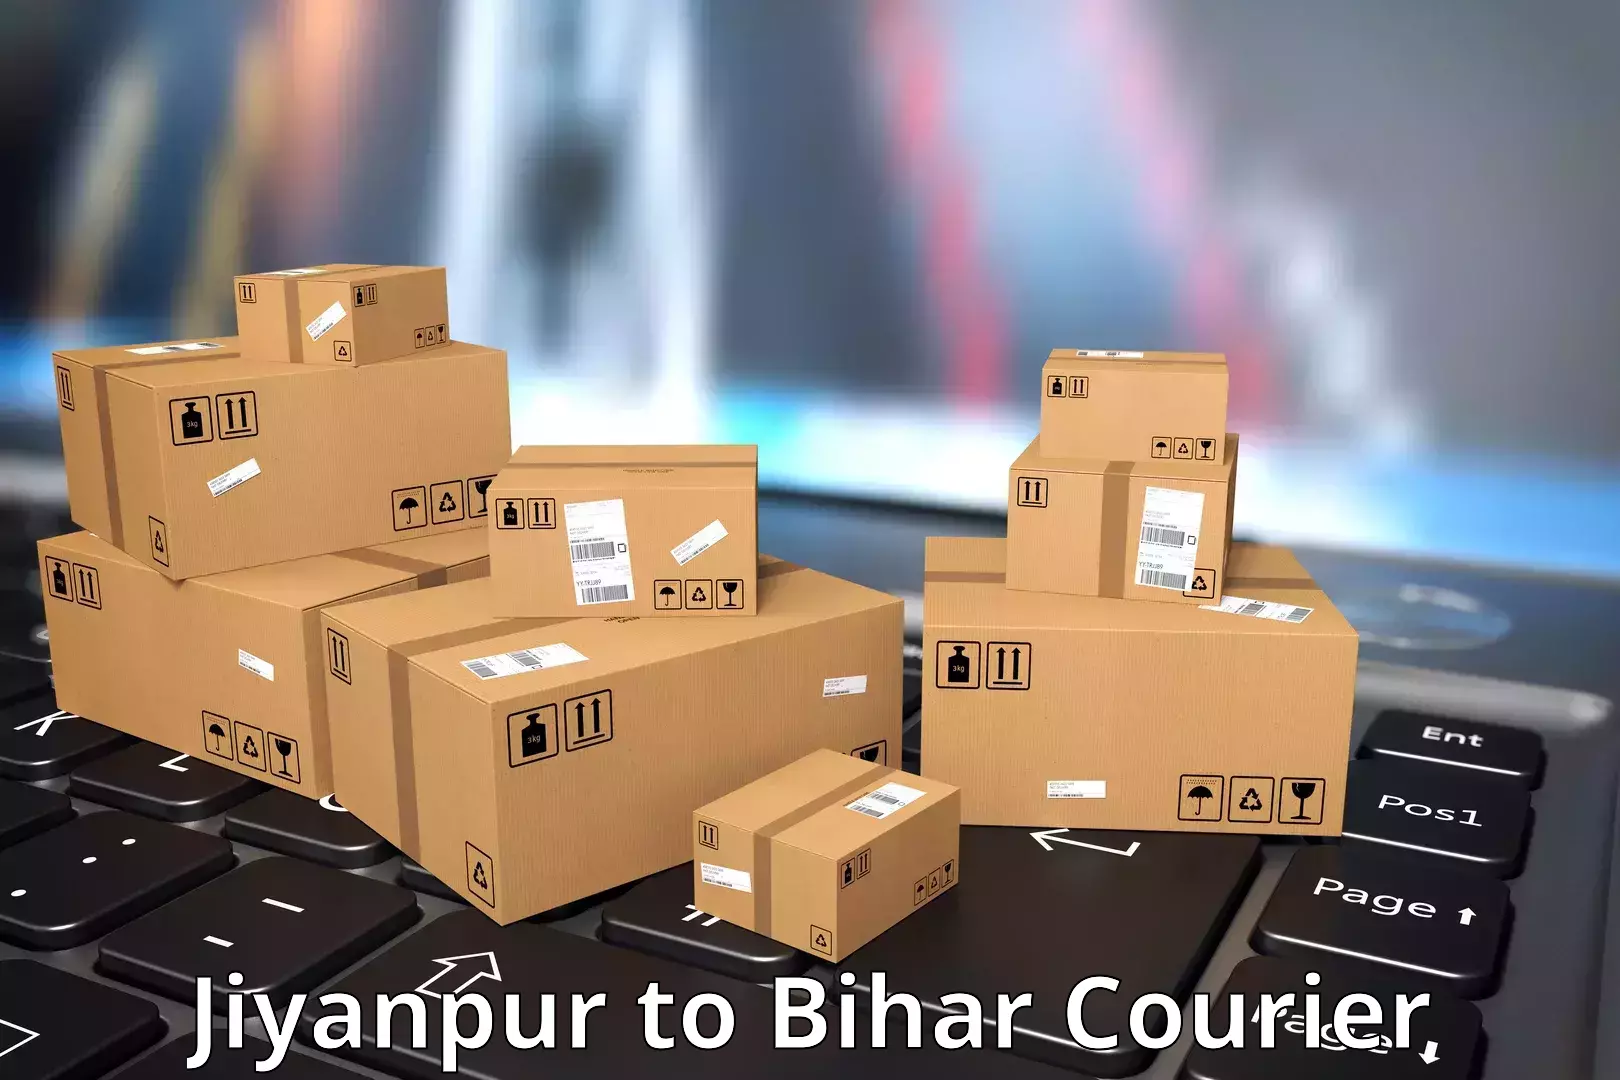 State-of-the-art courier technology Jiyanpur to Rajpur